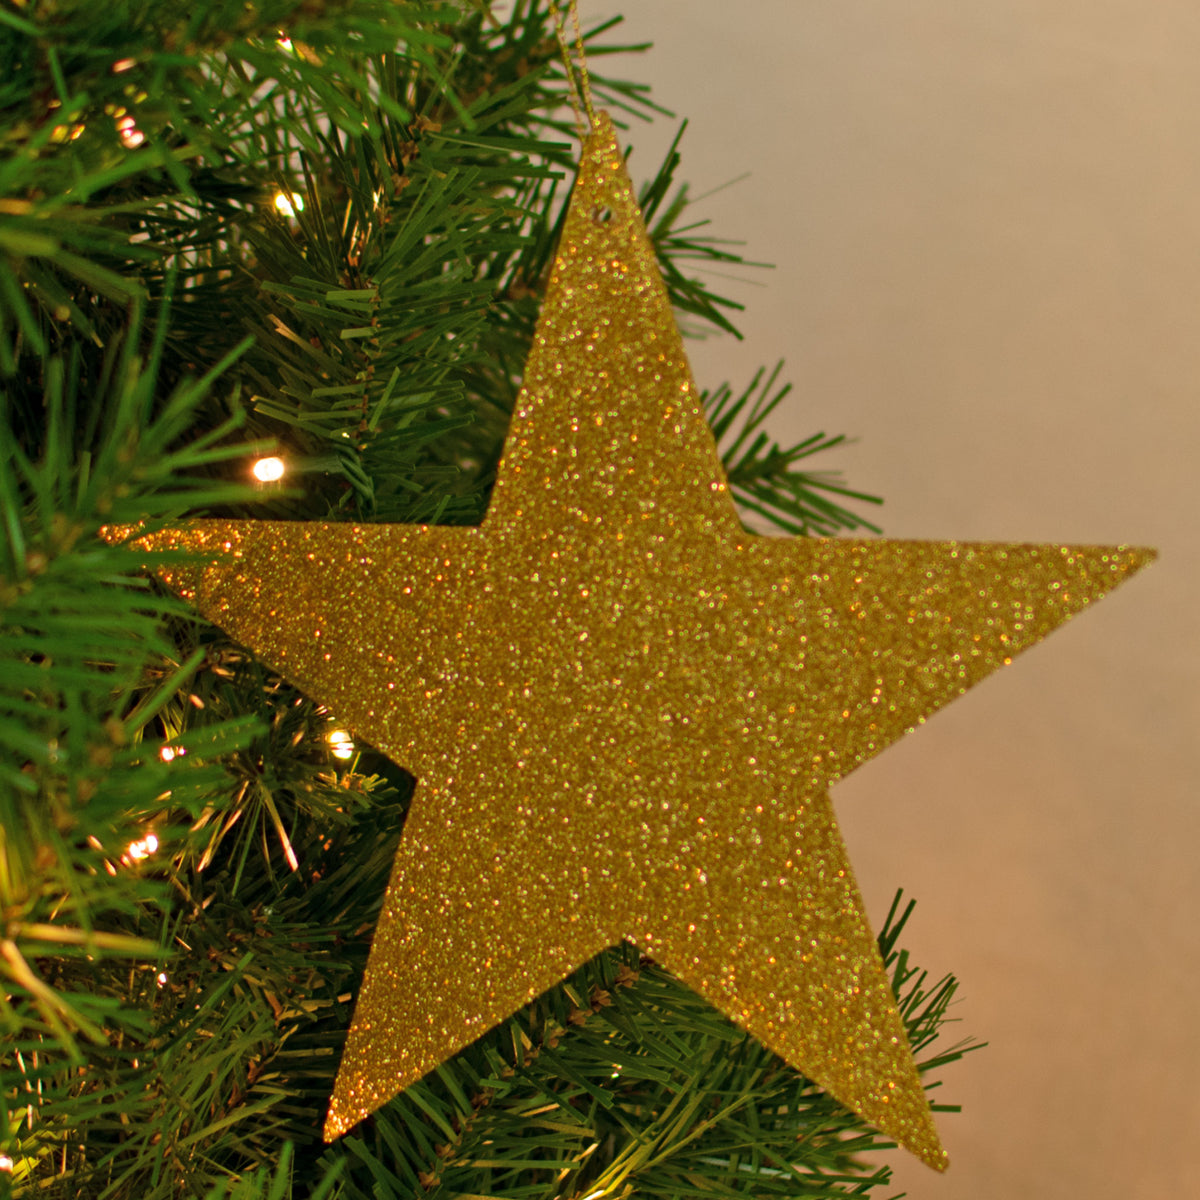 Shiny Gold Glittered Stars are your perfect Christmas Ornaments and Holiday Decorations!